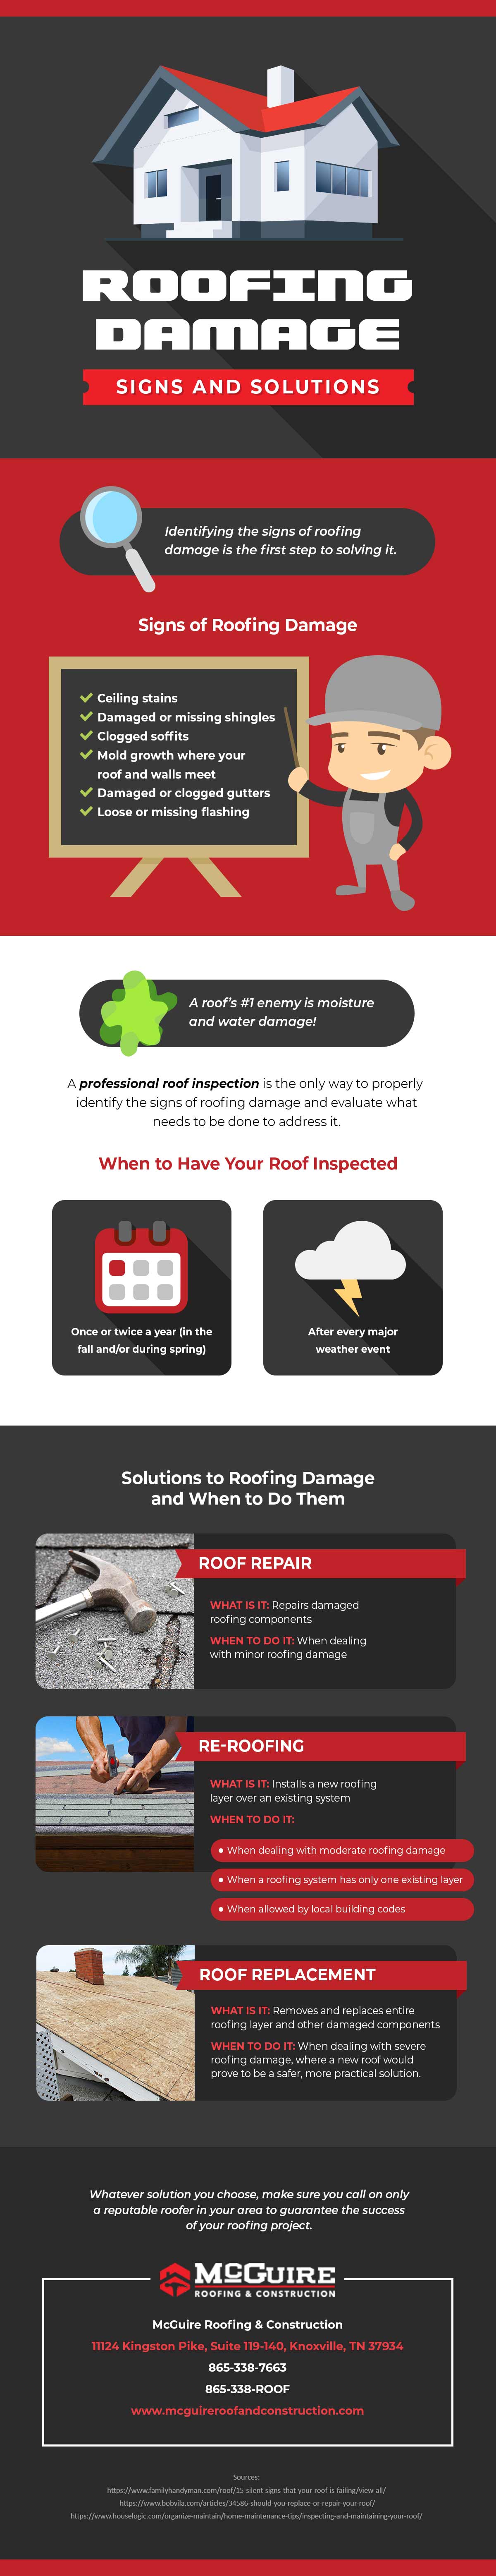 Damaged Roofing Signs and Solutions